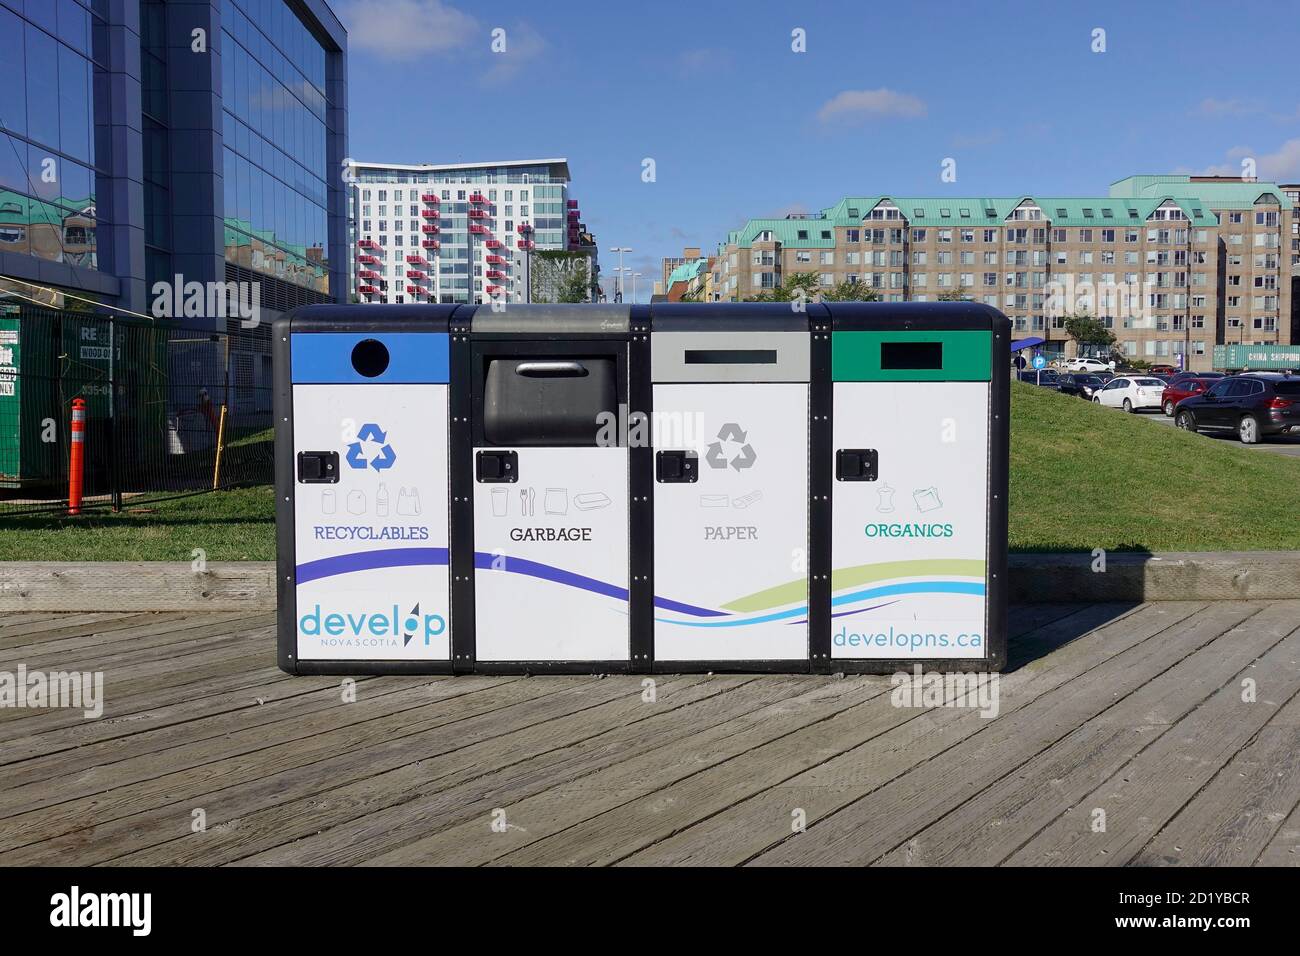 Modern Seperated Public Recycling Litter Bins For Organics Recyclables Paper And Garbage On The Boardwalk In Halifax Nova Scotia Canada Stock Photo